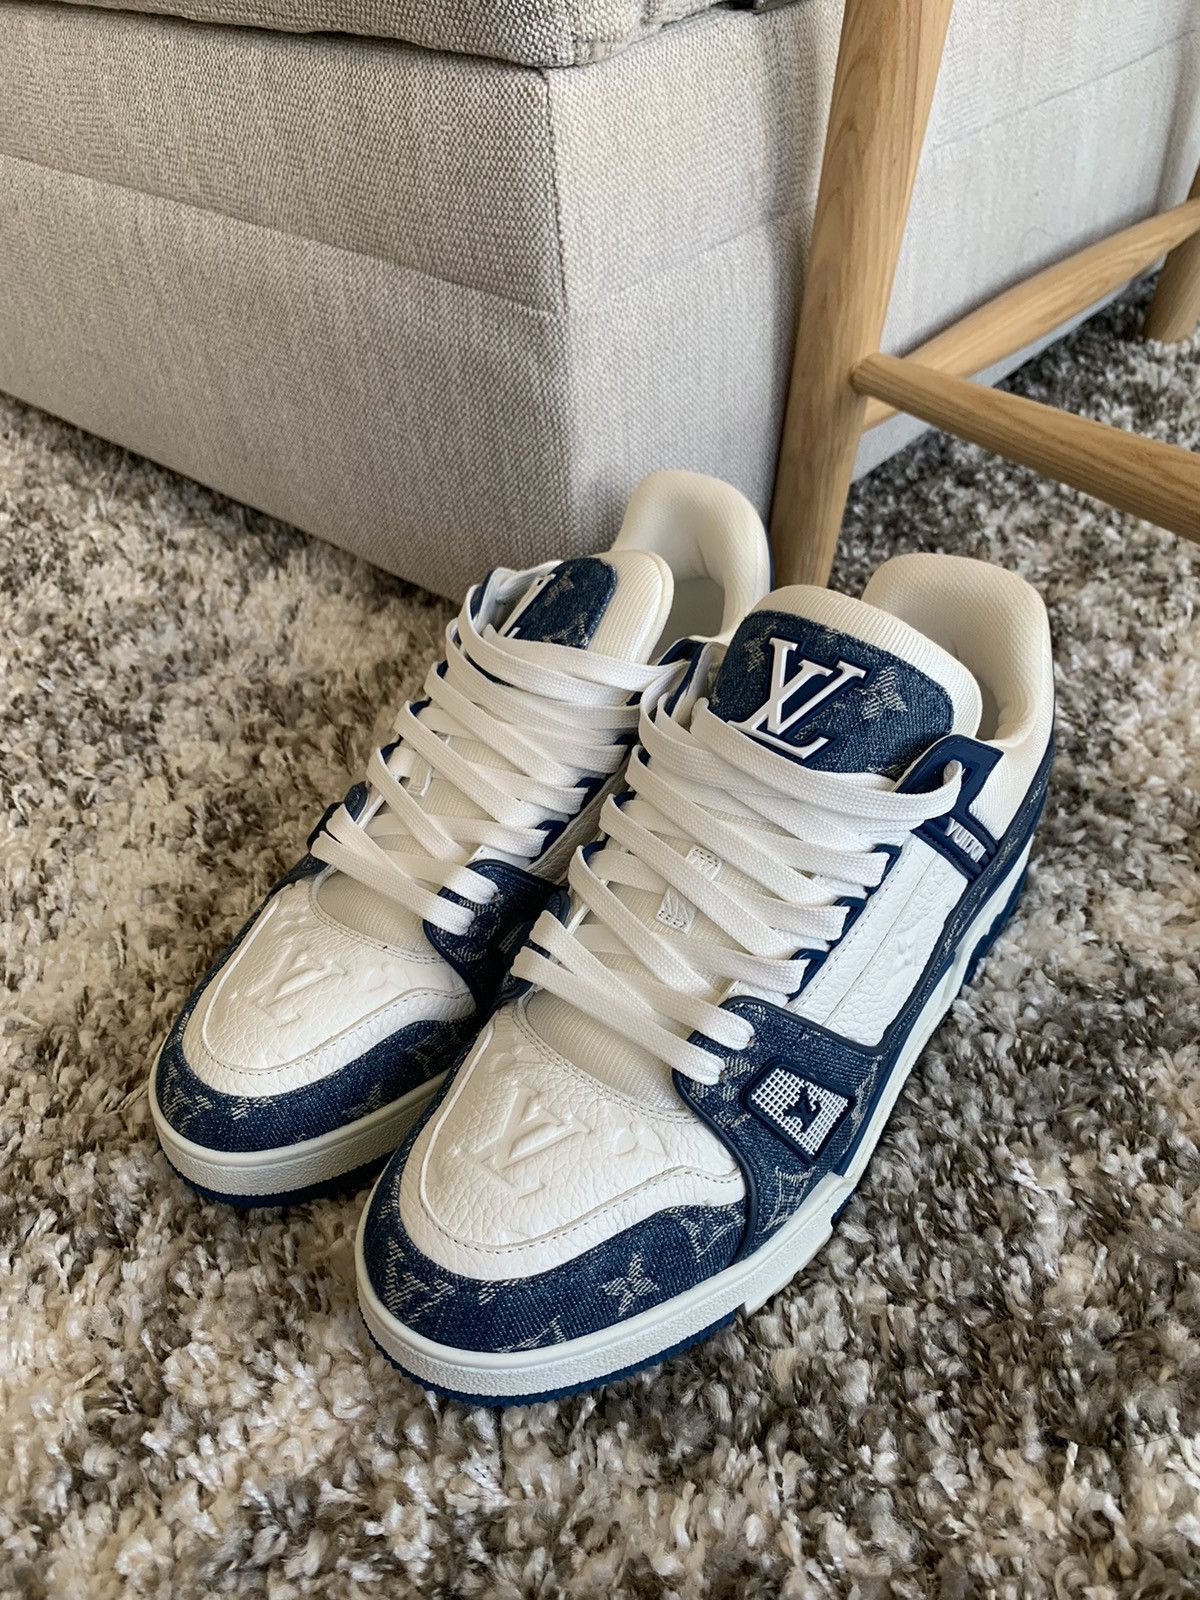 Louis Vuitton NYC Pop Up Exclusive Blue Low Top Trainer Sneaker LV 8.5 fits  big